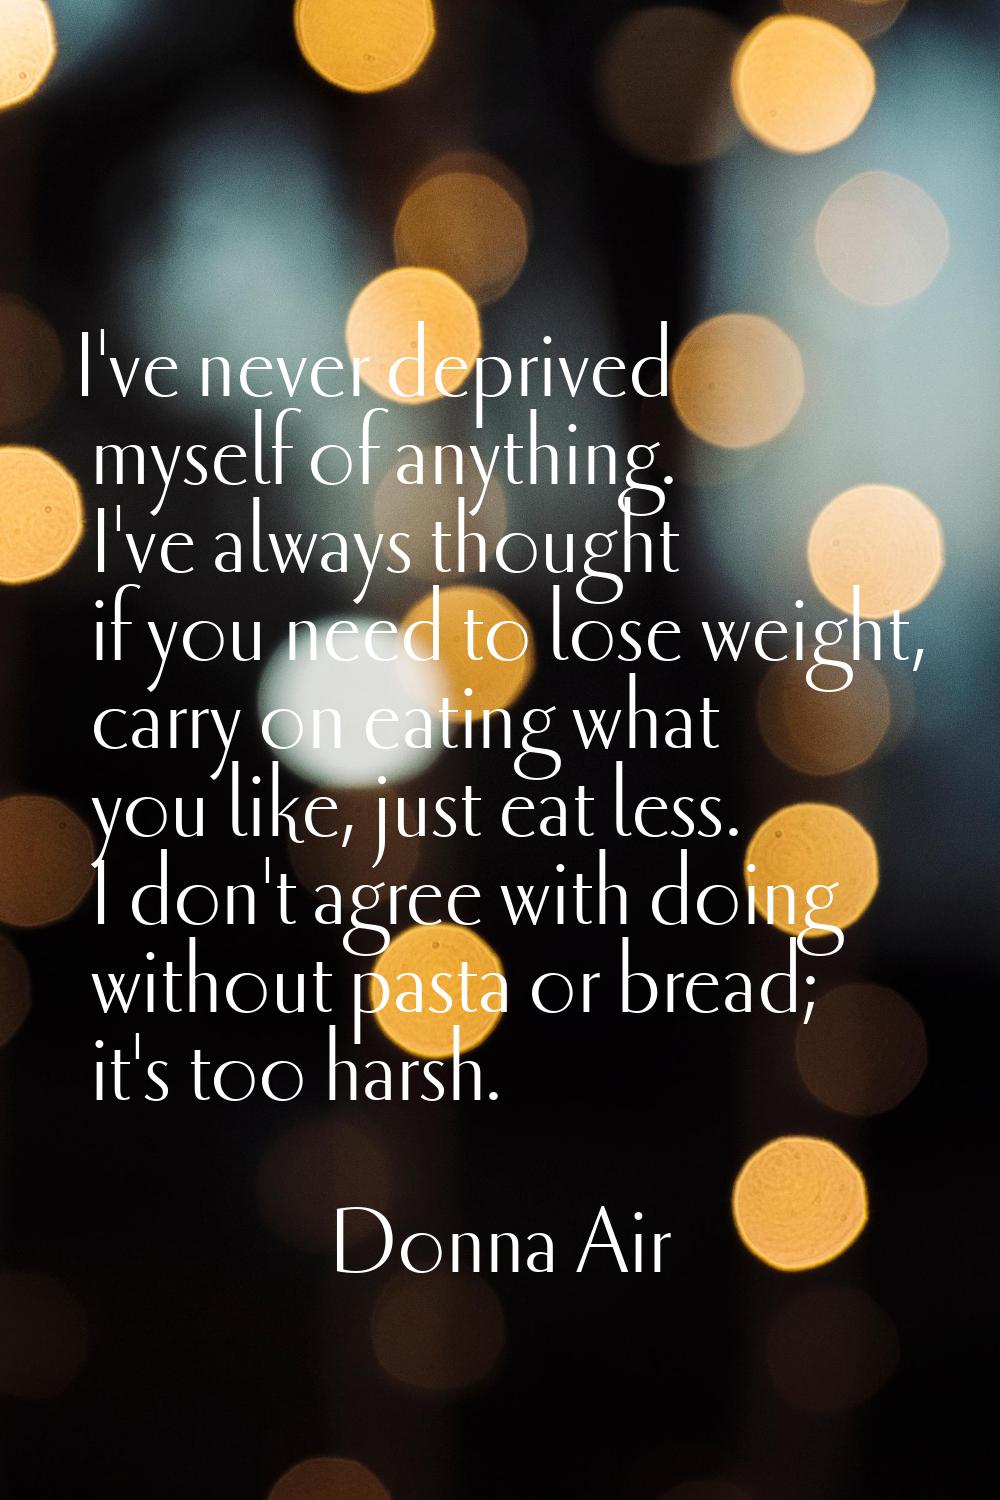 I've never deprived myself of anything. I've always thought if you need to lose weight, carry on ea